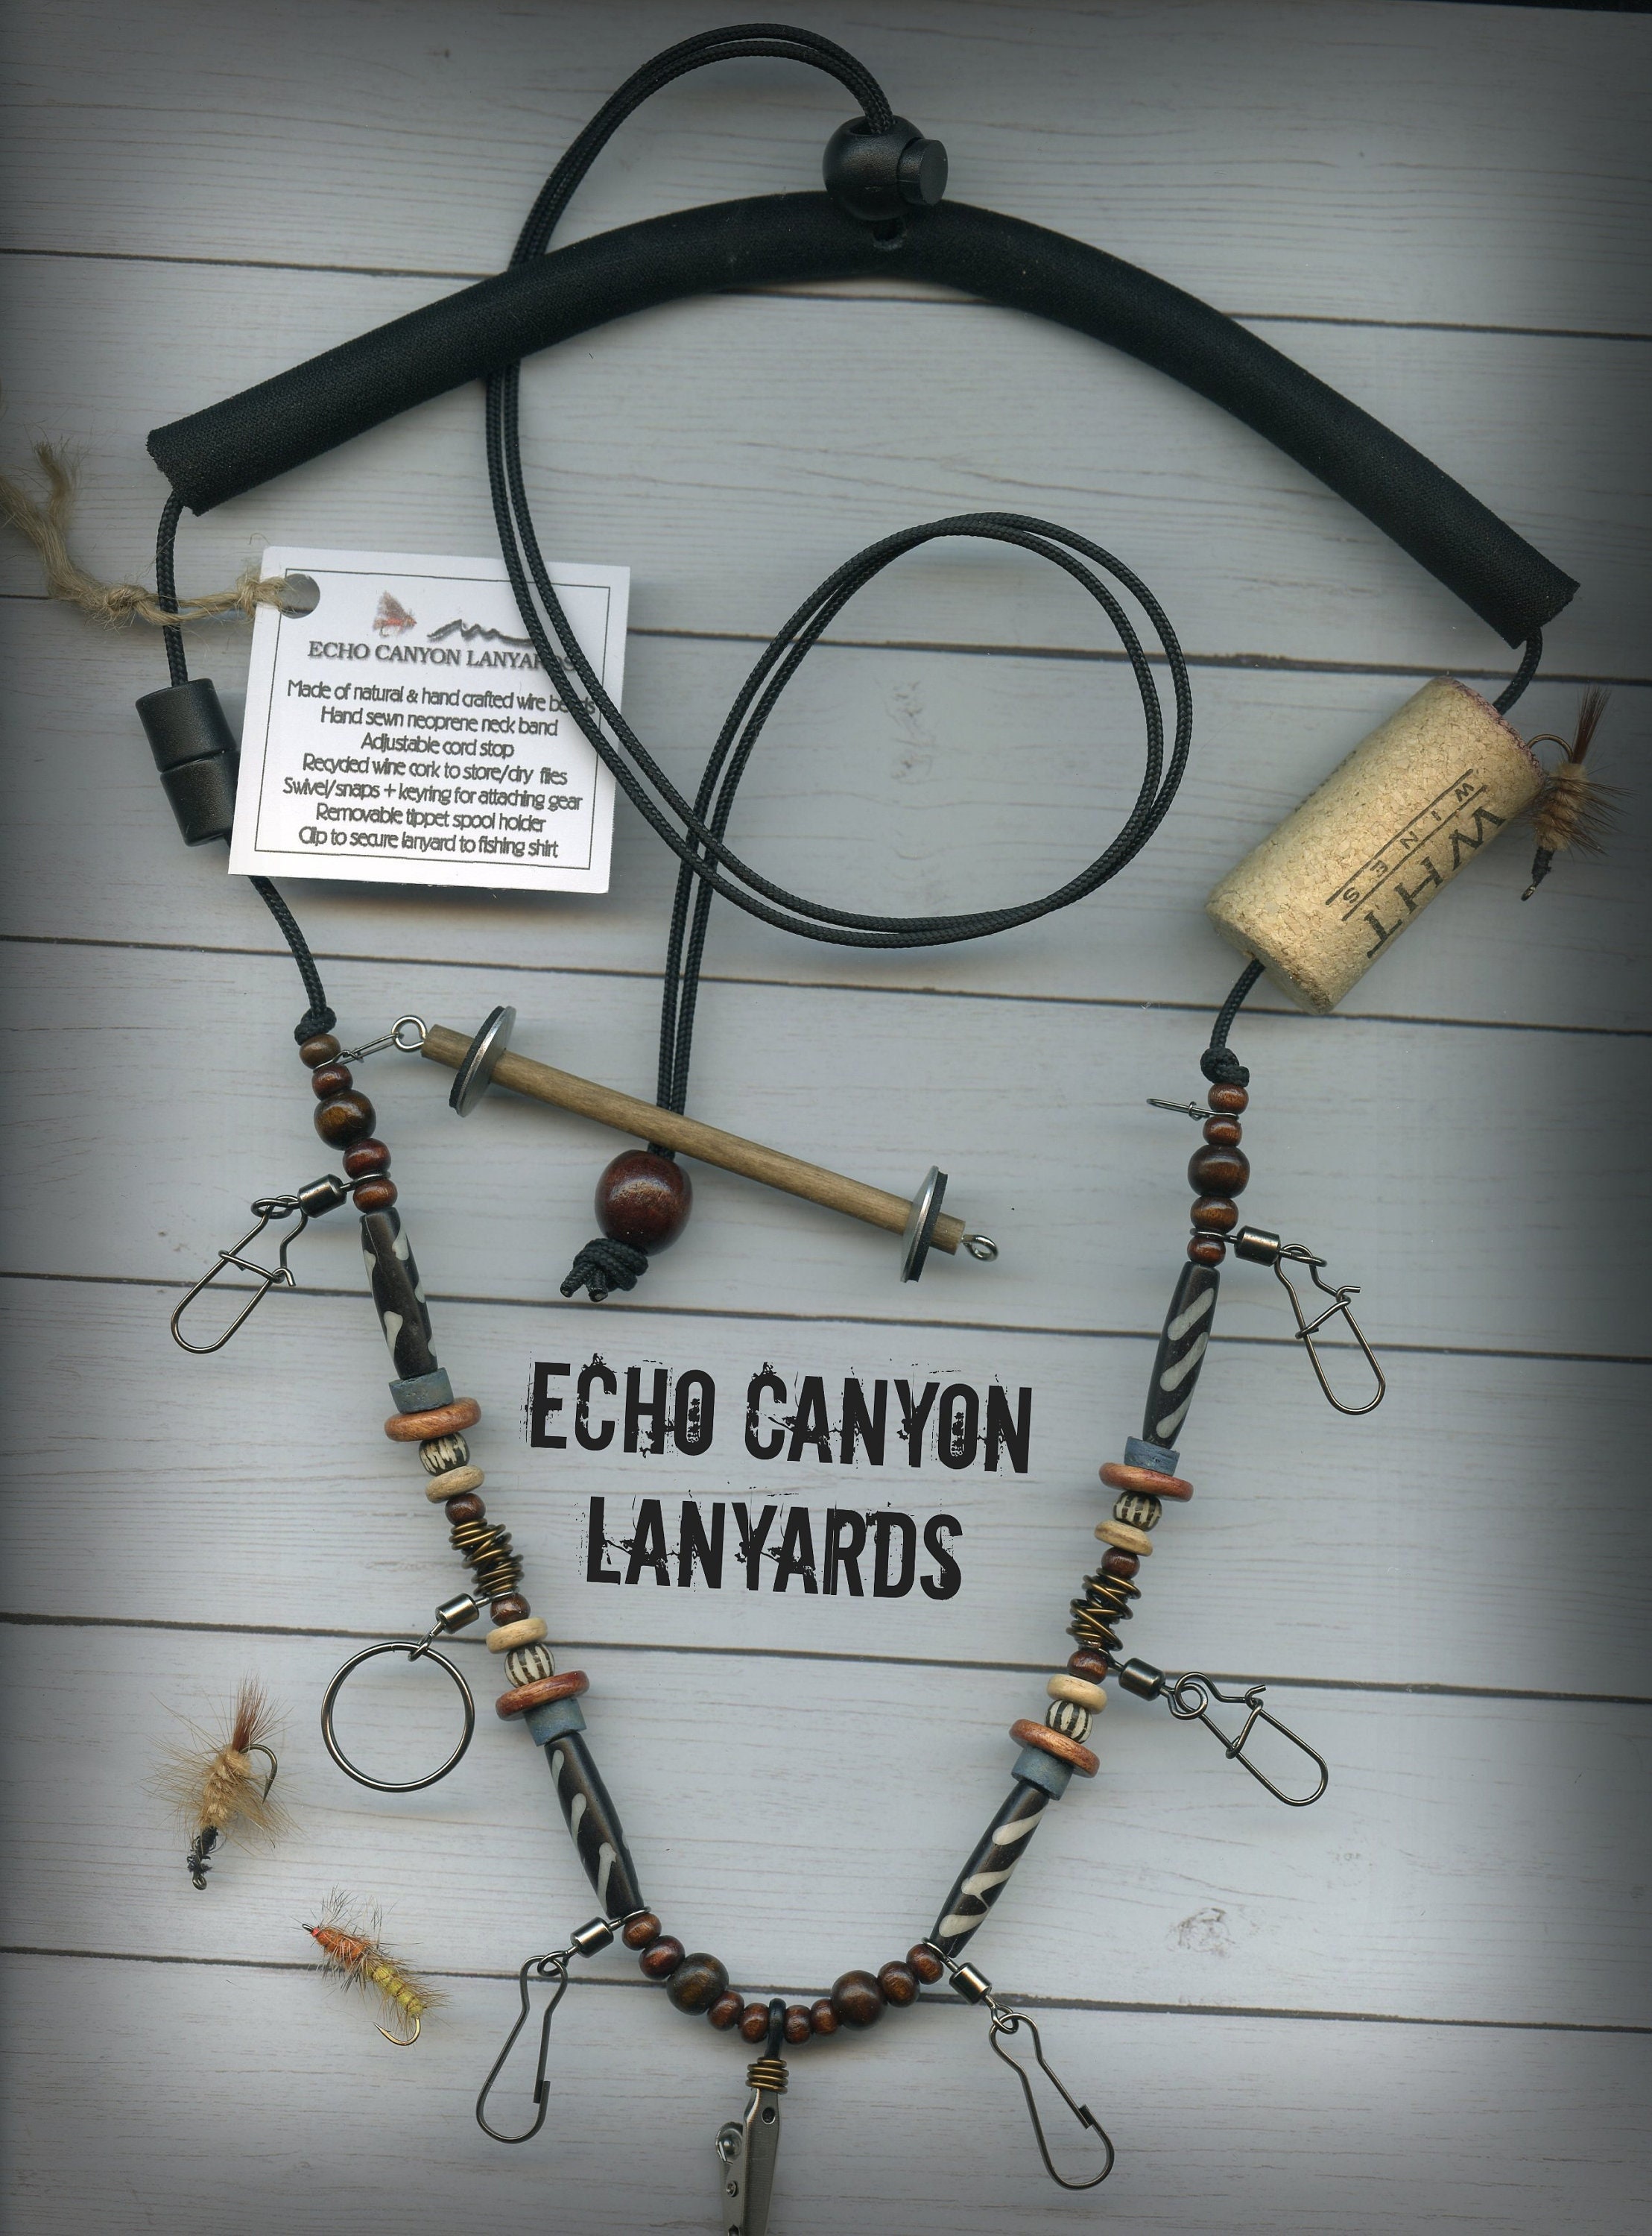 Fly Fishing Lanyard Tippet Holder, With Wood, Bone and Wire Beads